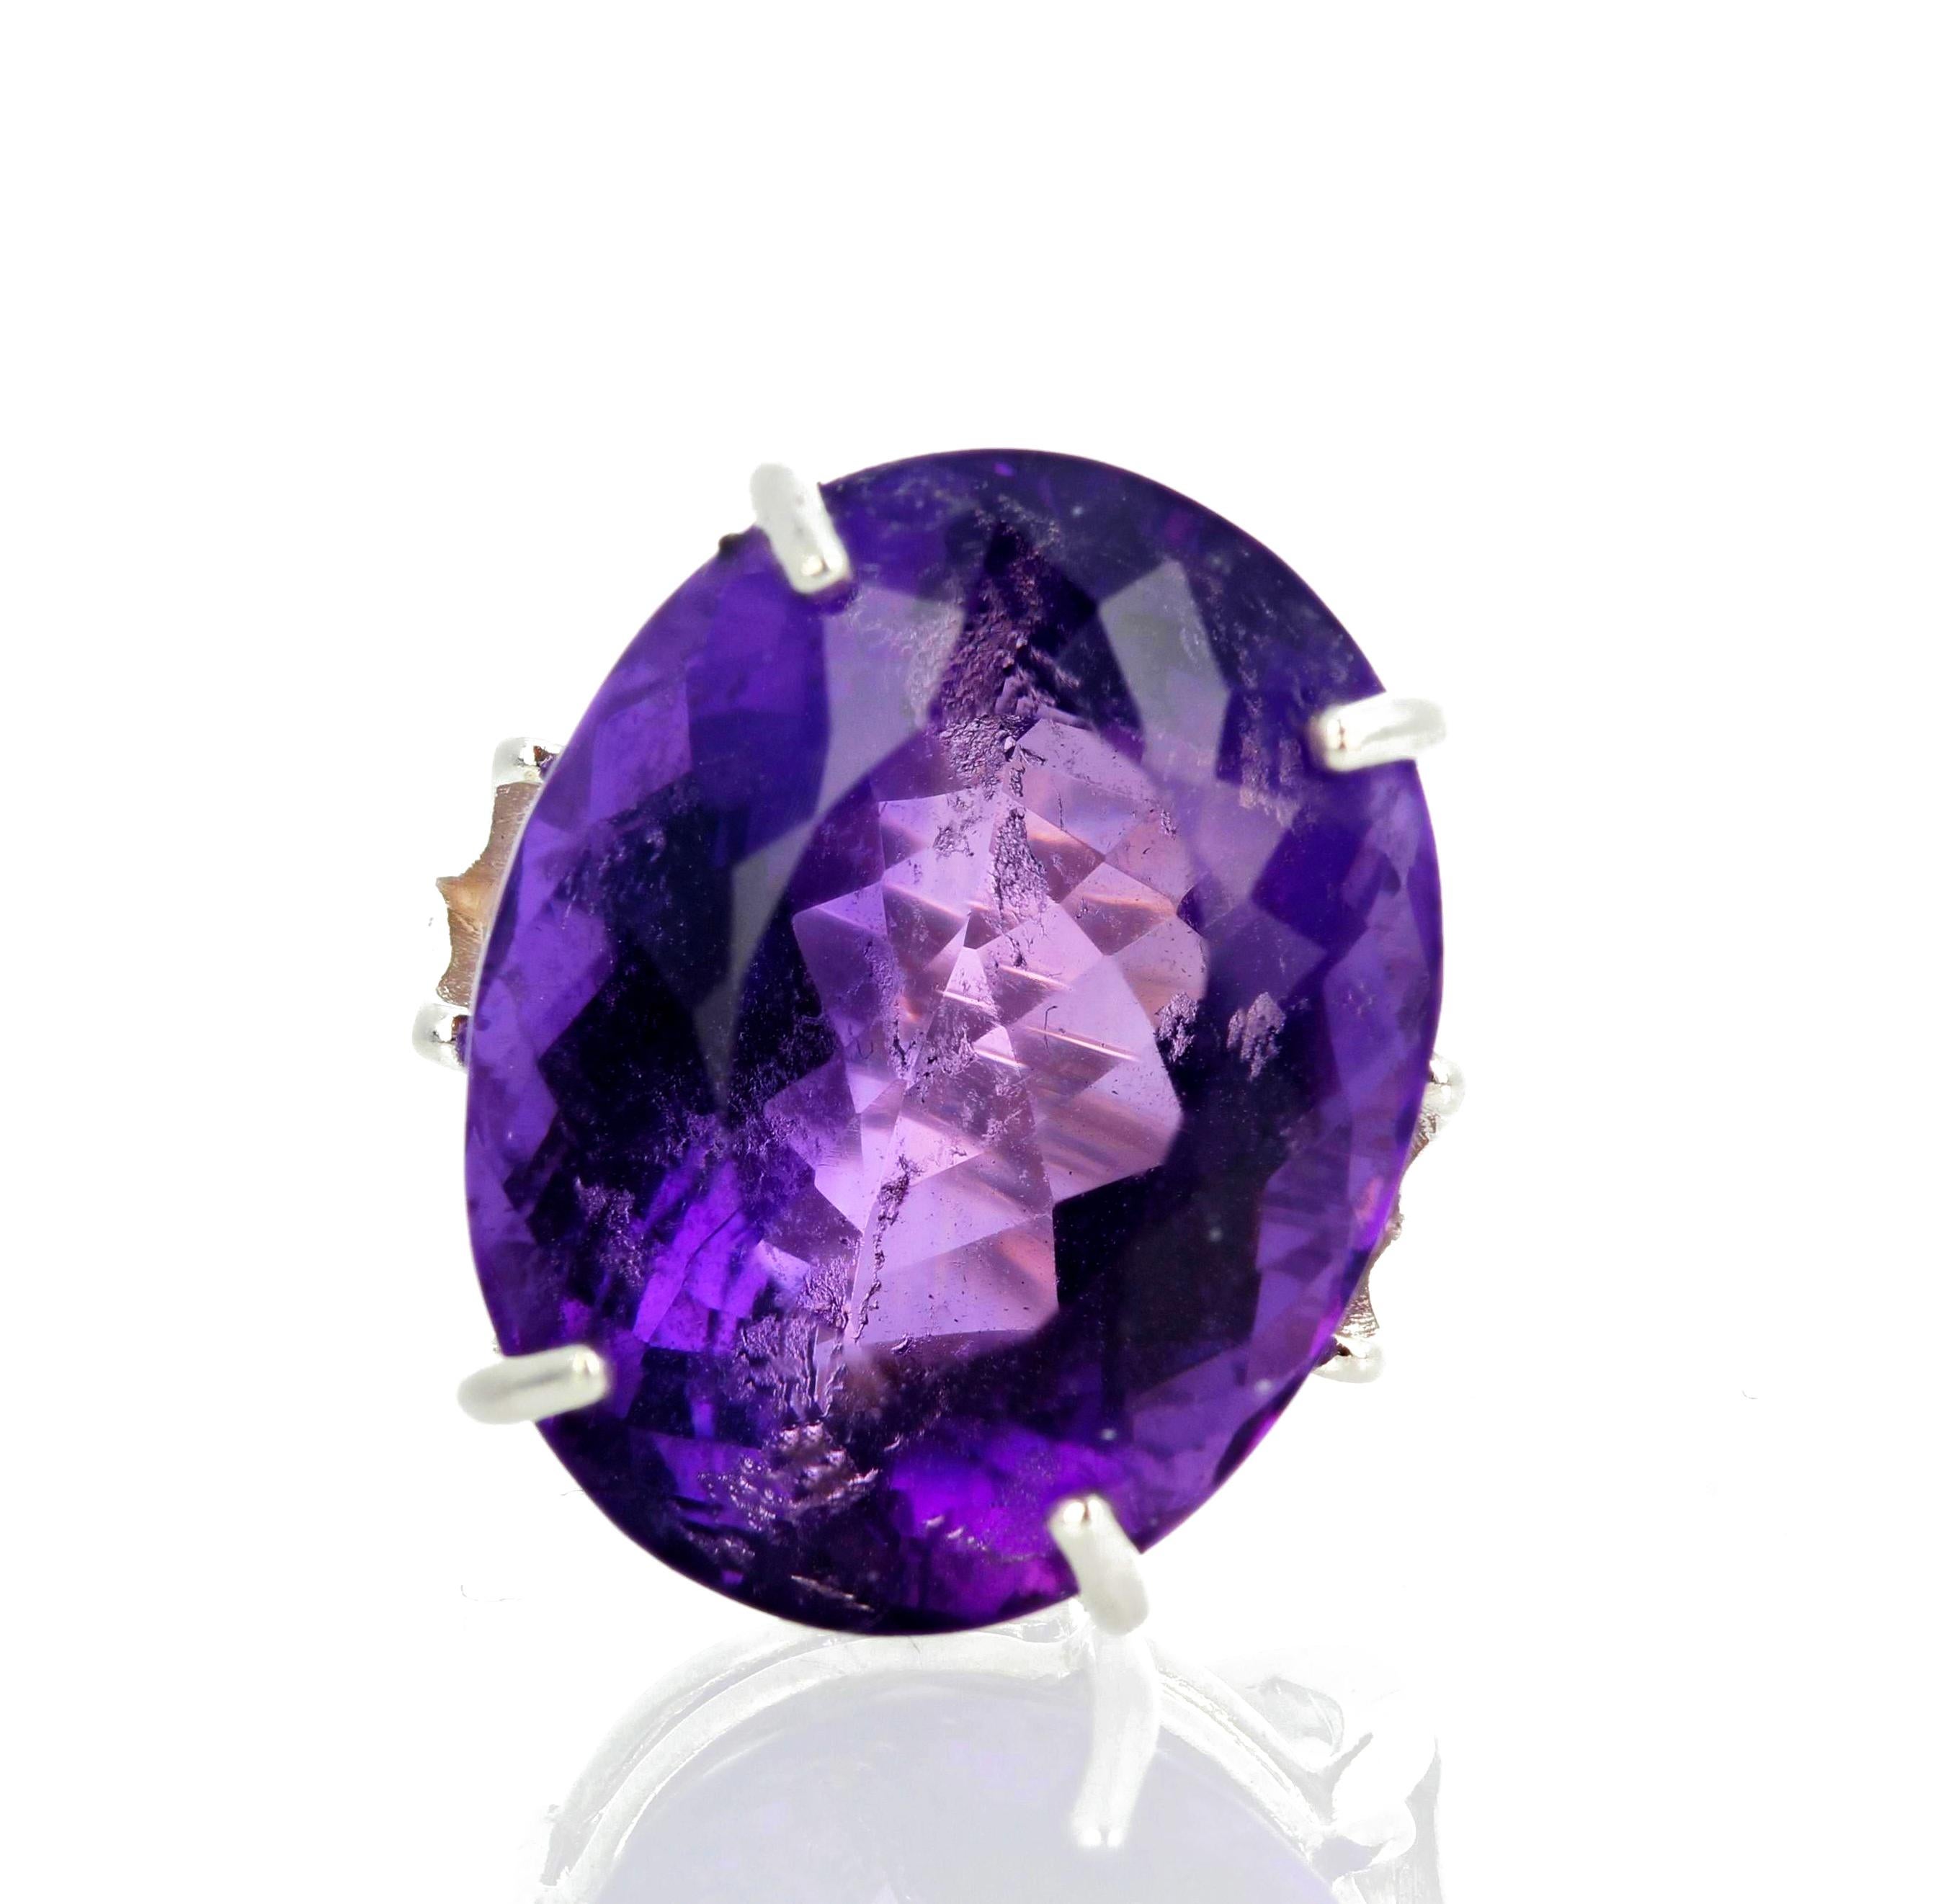 This glorious glittering Amethyst is 30.2 carats, is 23 mm x 18 mm, and is set in a sterling silver ring size 7 (sizable).  This beautiful Amethyst has some fascinating beautiful pinky glitters in it.  If you wish faster delivery on your purchase